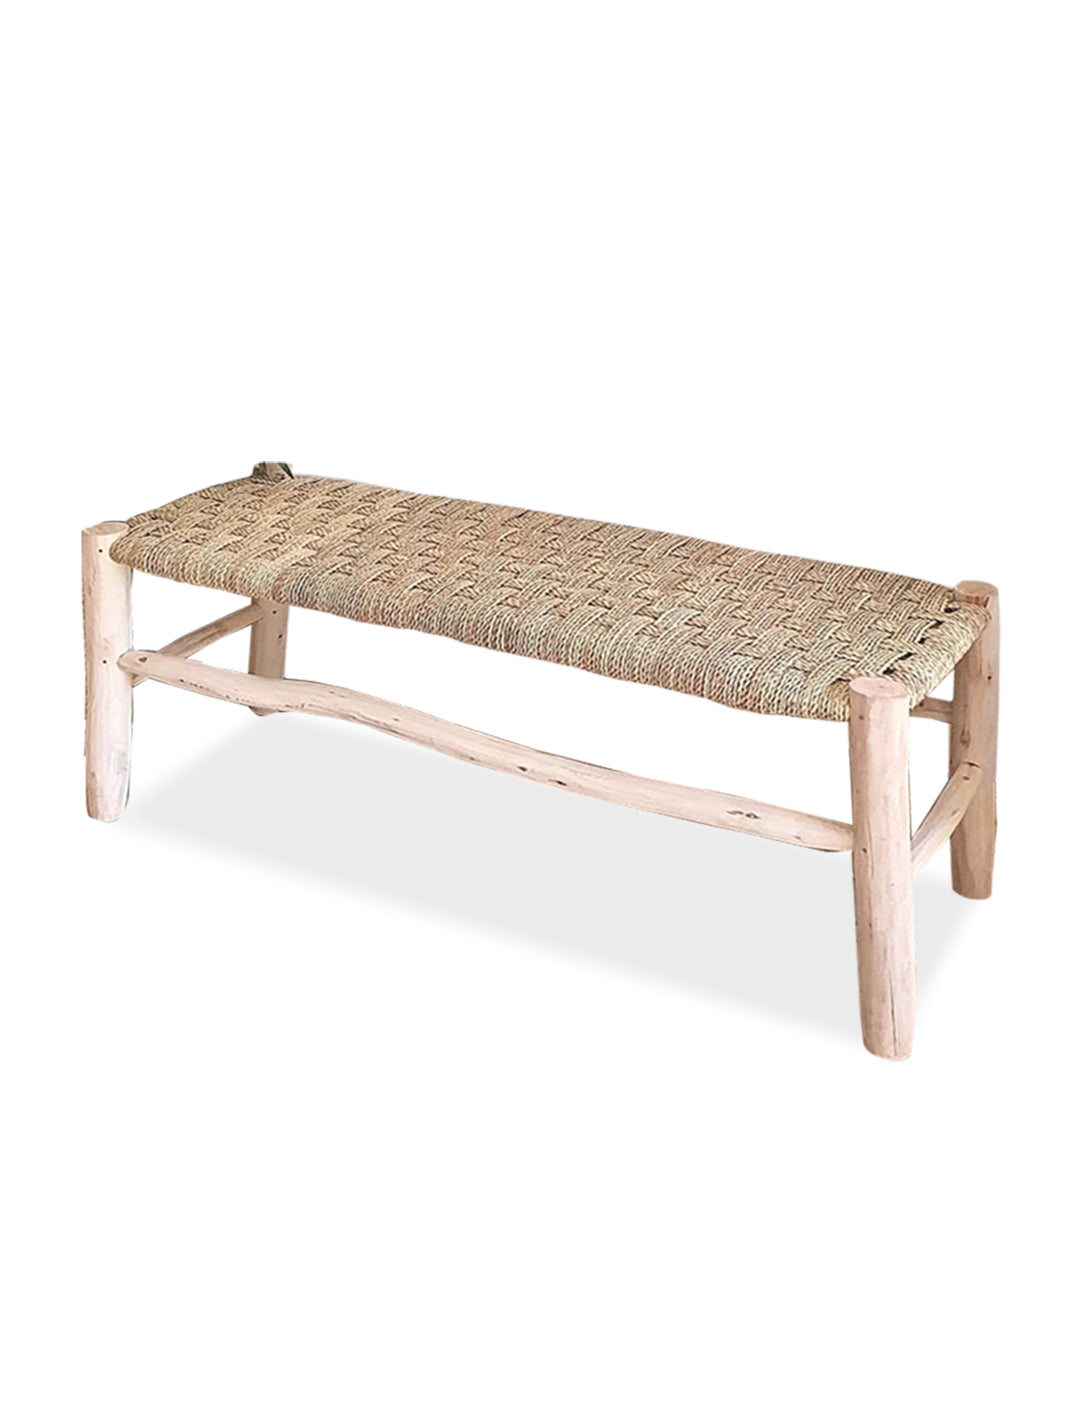 Handcrafted Natural Braiding Solid Wooden Bench | Checkered Pattern Braiding Libitii Benches LIB-0097